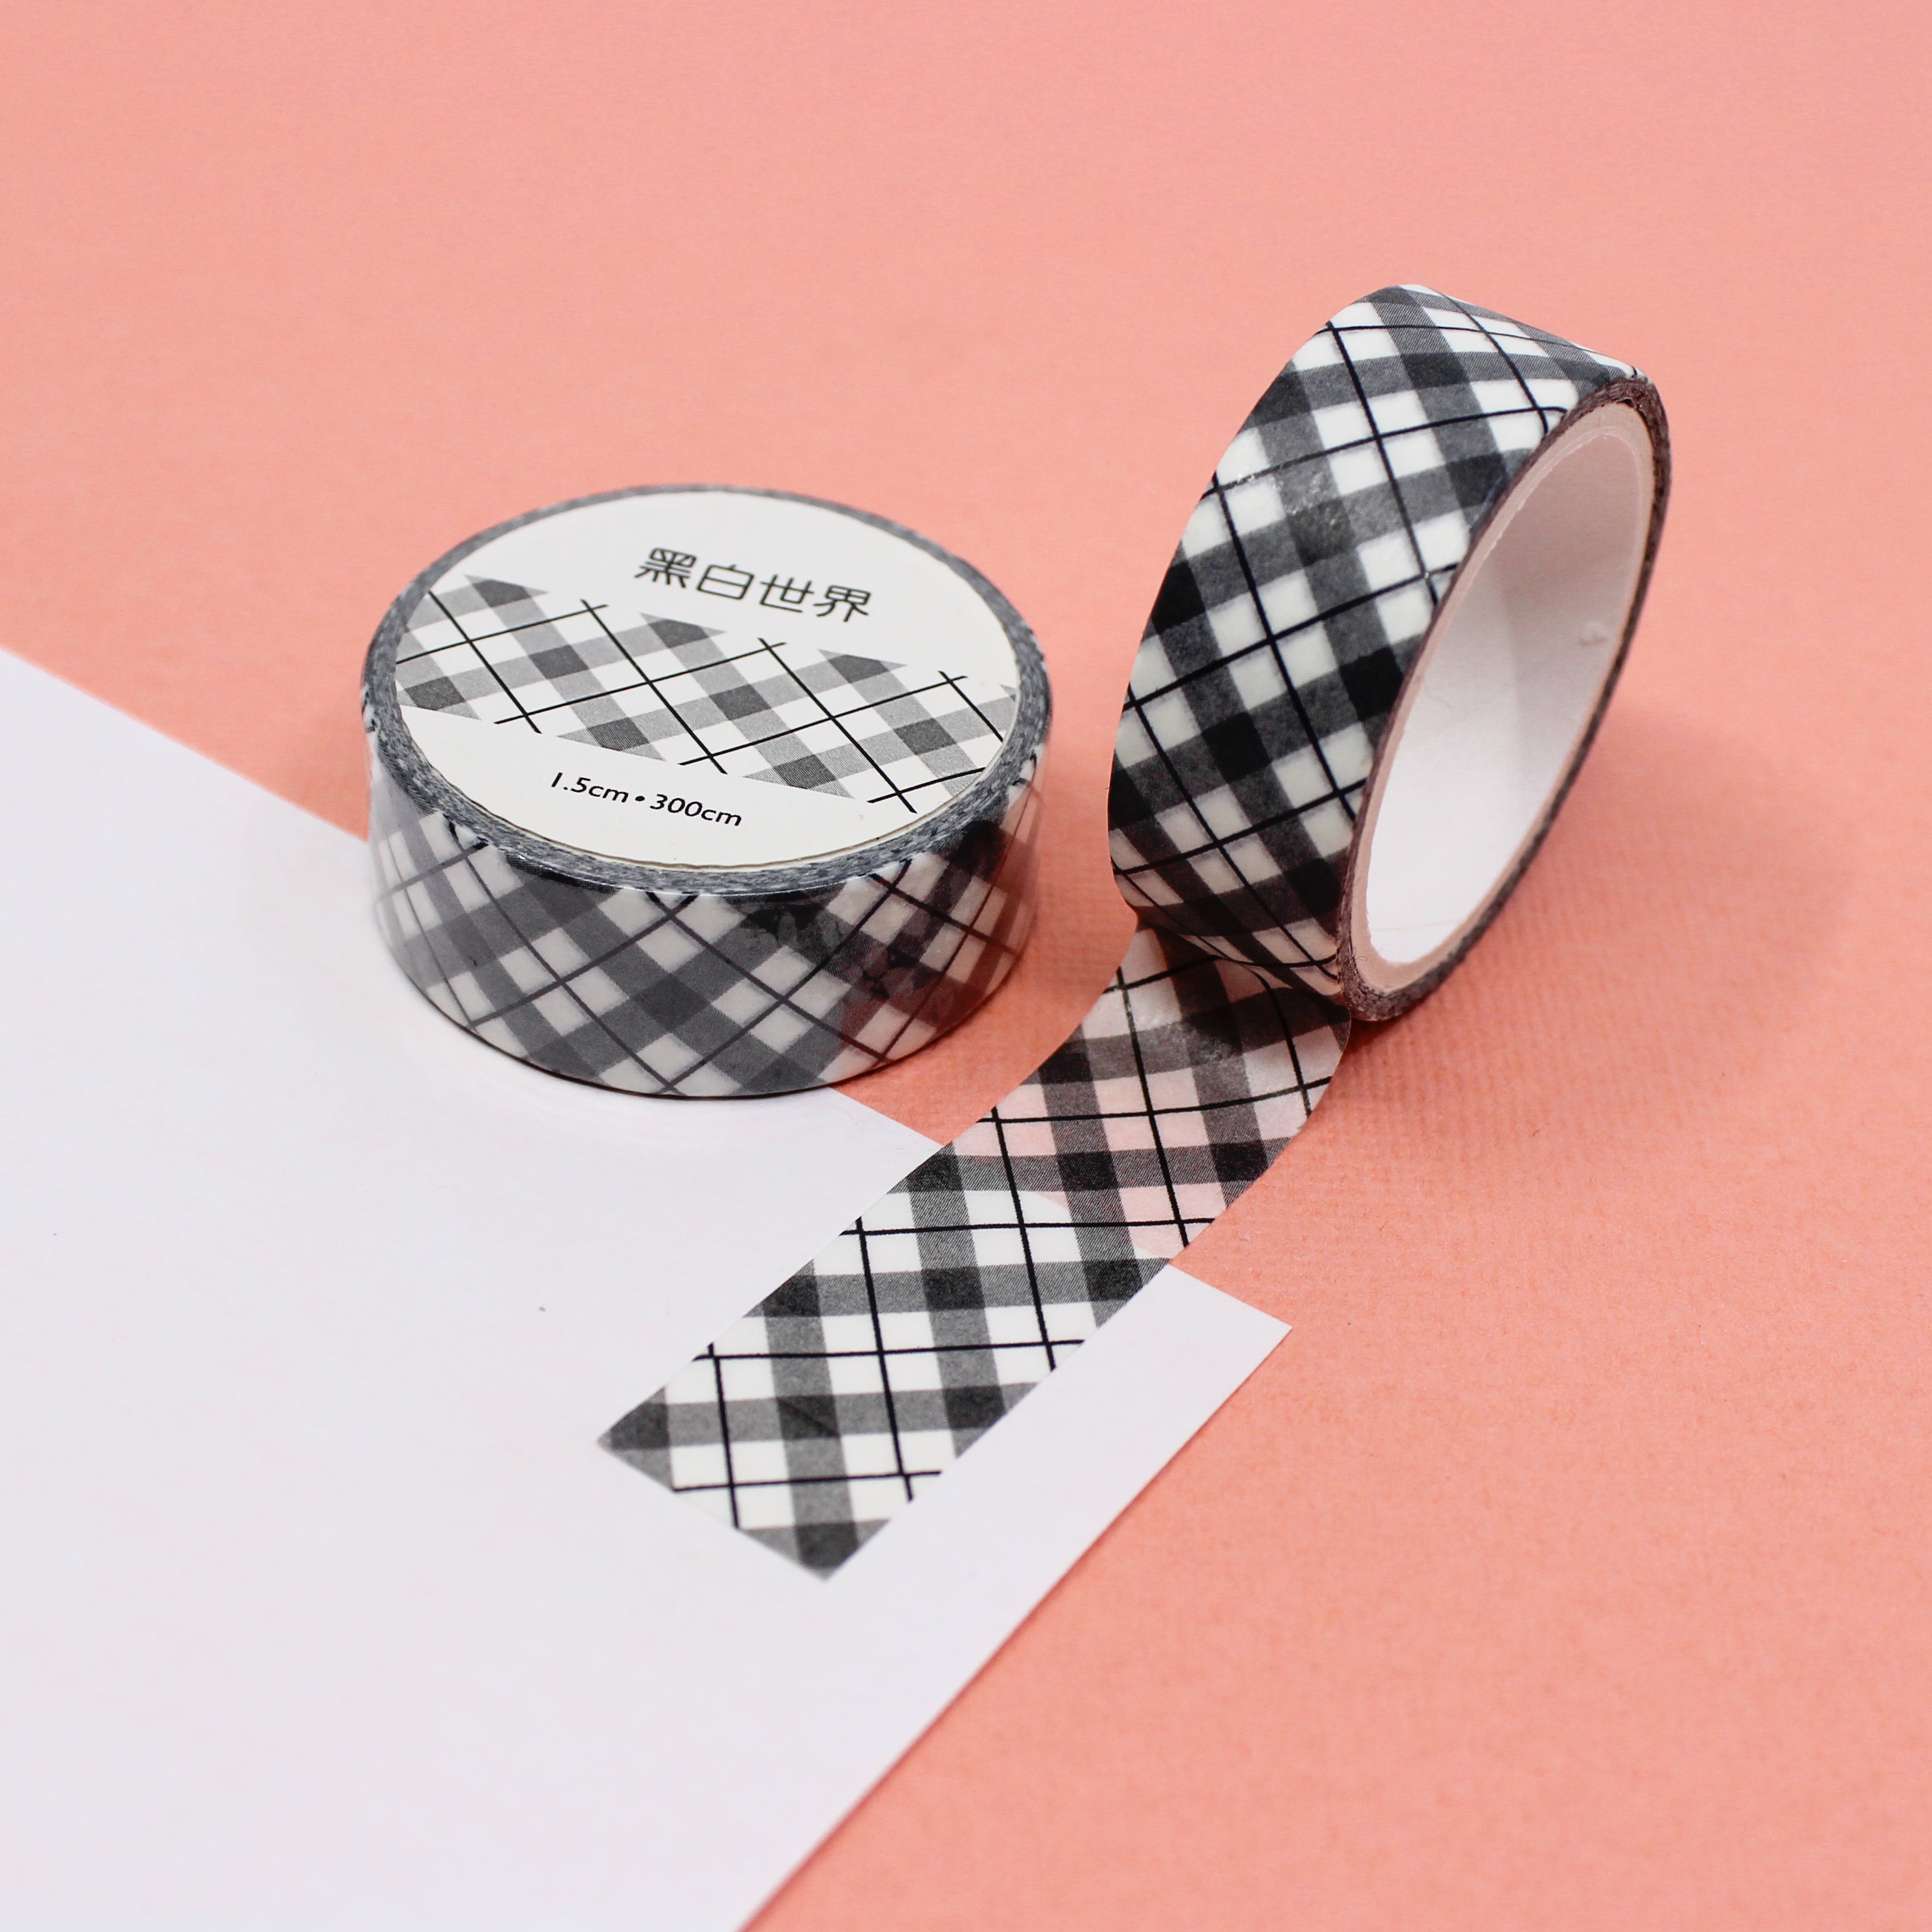 Infuse your projects with a sense of timeless style using our black and white plaid lattice pattern washi tape, adorned with a chic and versatile lattice design. This tape is sold at BBB Supplies Craft Shop.